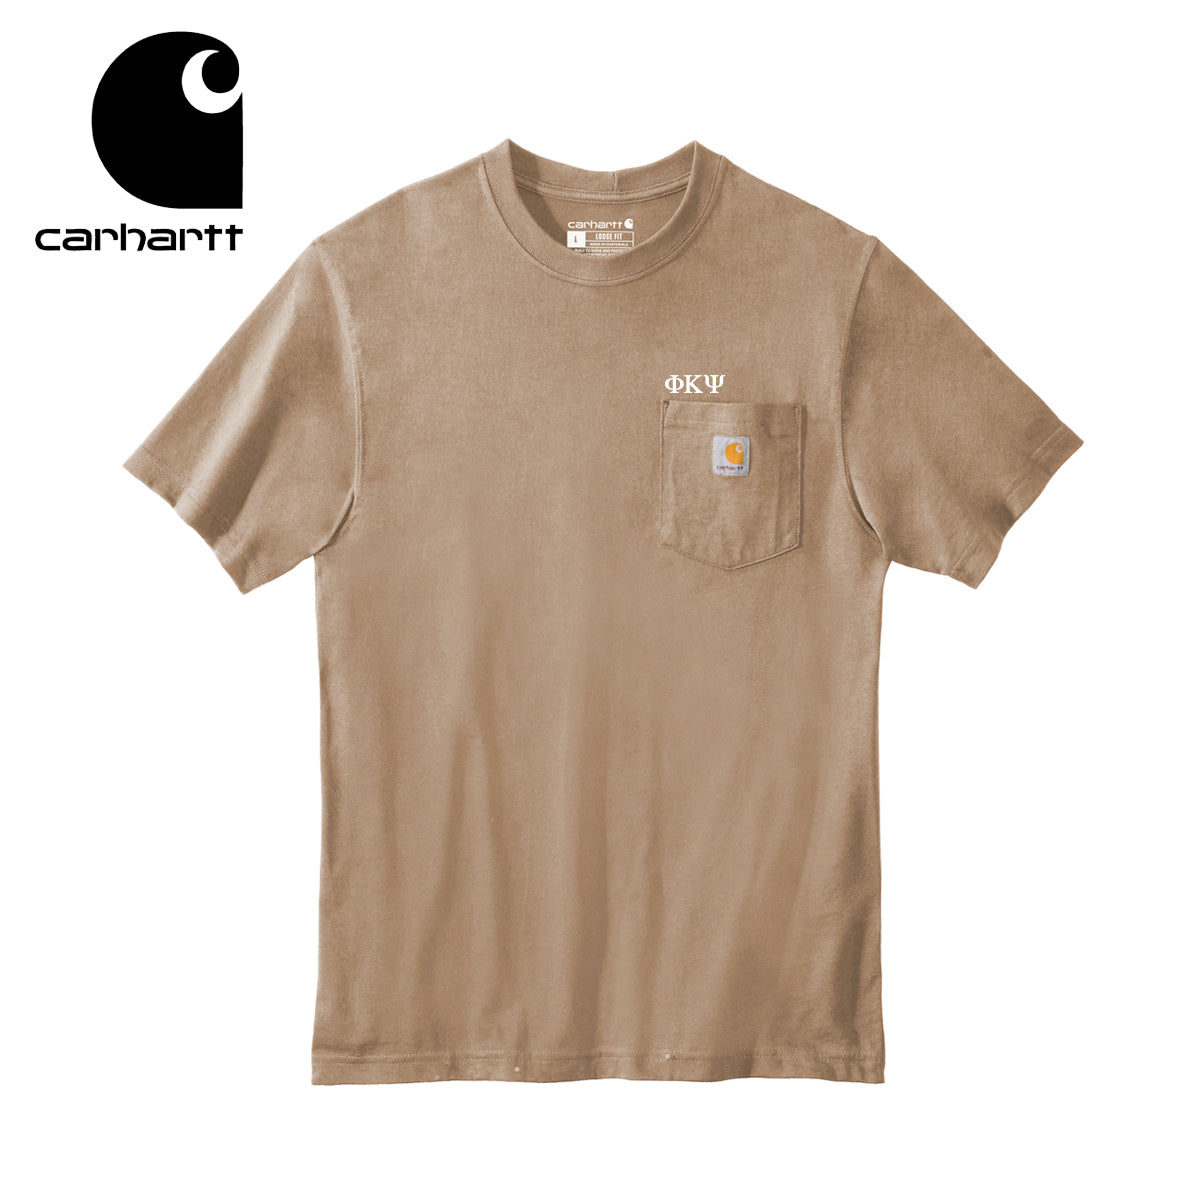 Phi Psi Carhartt Relaxed Fit Short Sleeve Pocket Tee